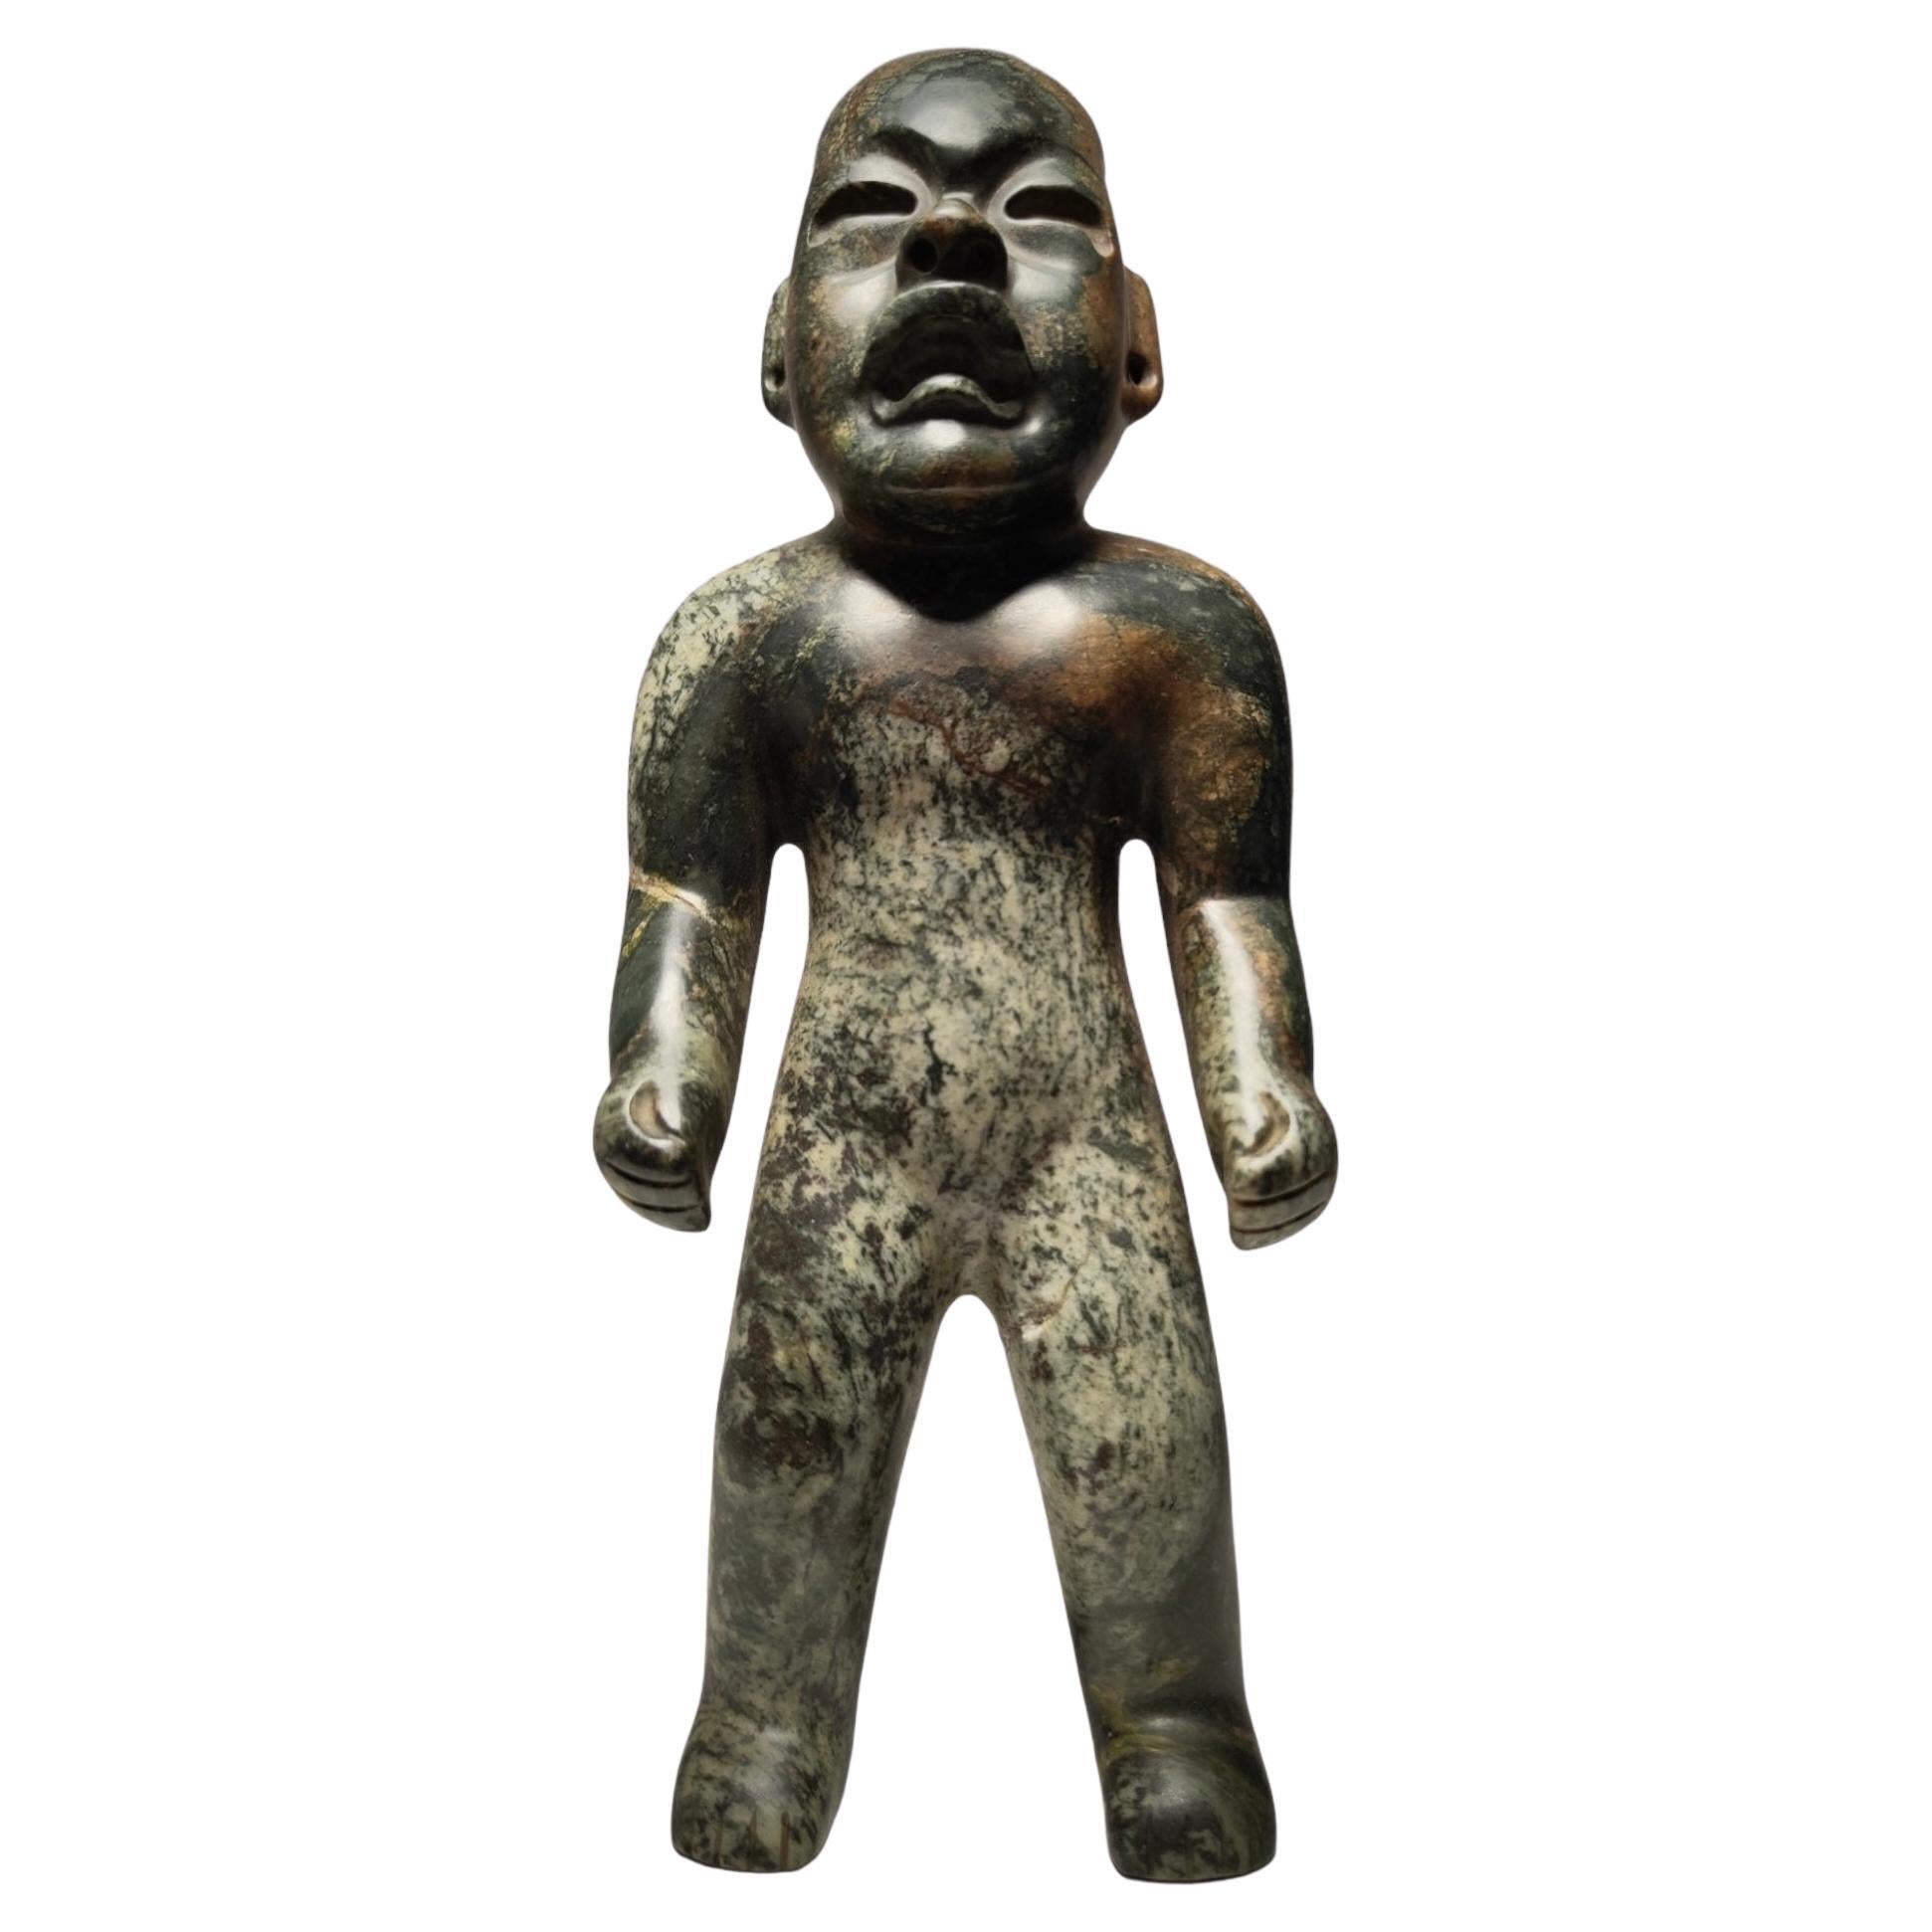 Important Olmec figure of Olmec ethnic dignitary from the preclassic period  For Sale